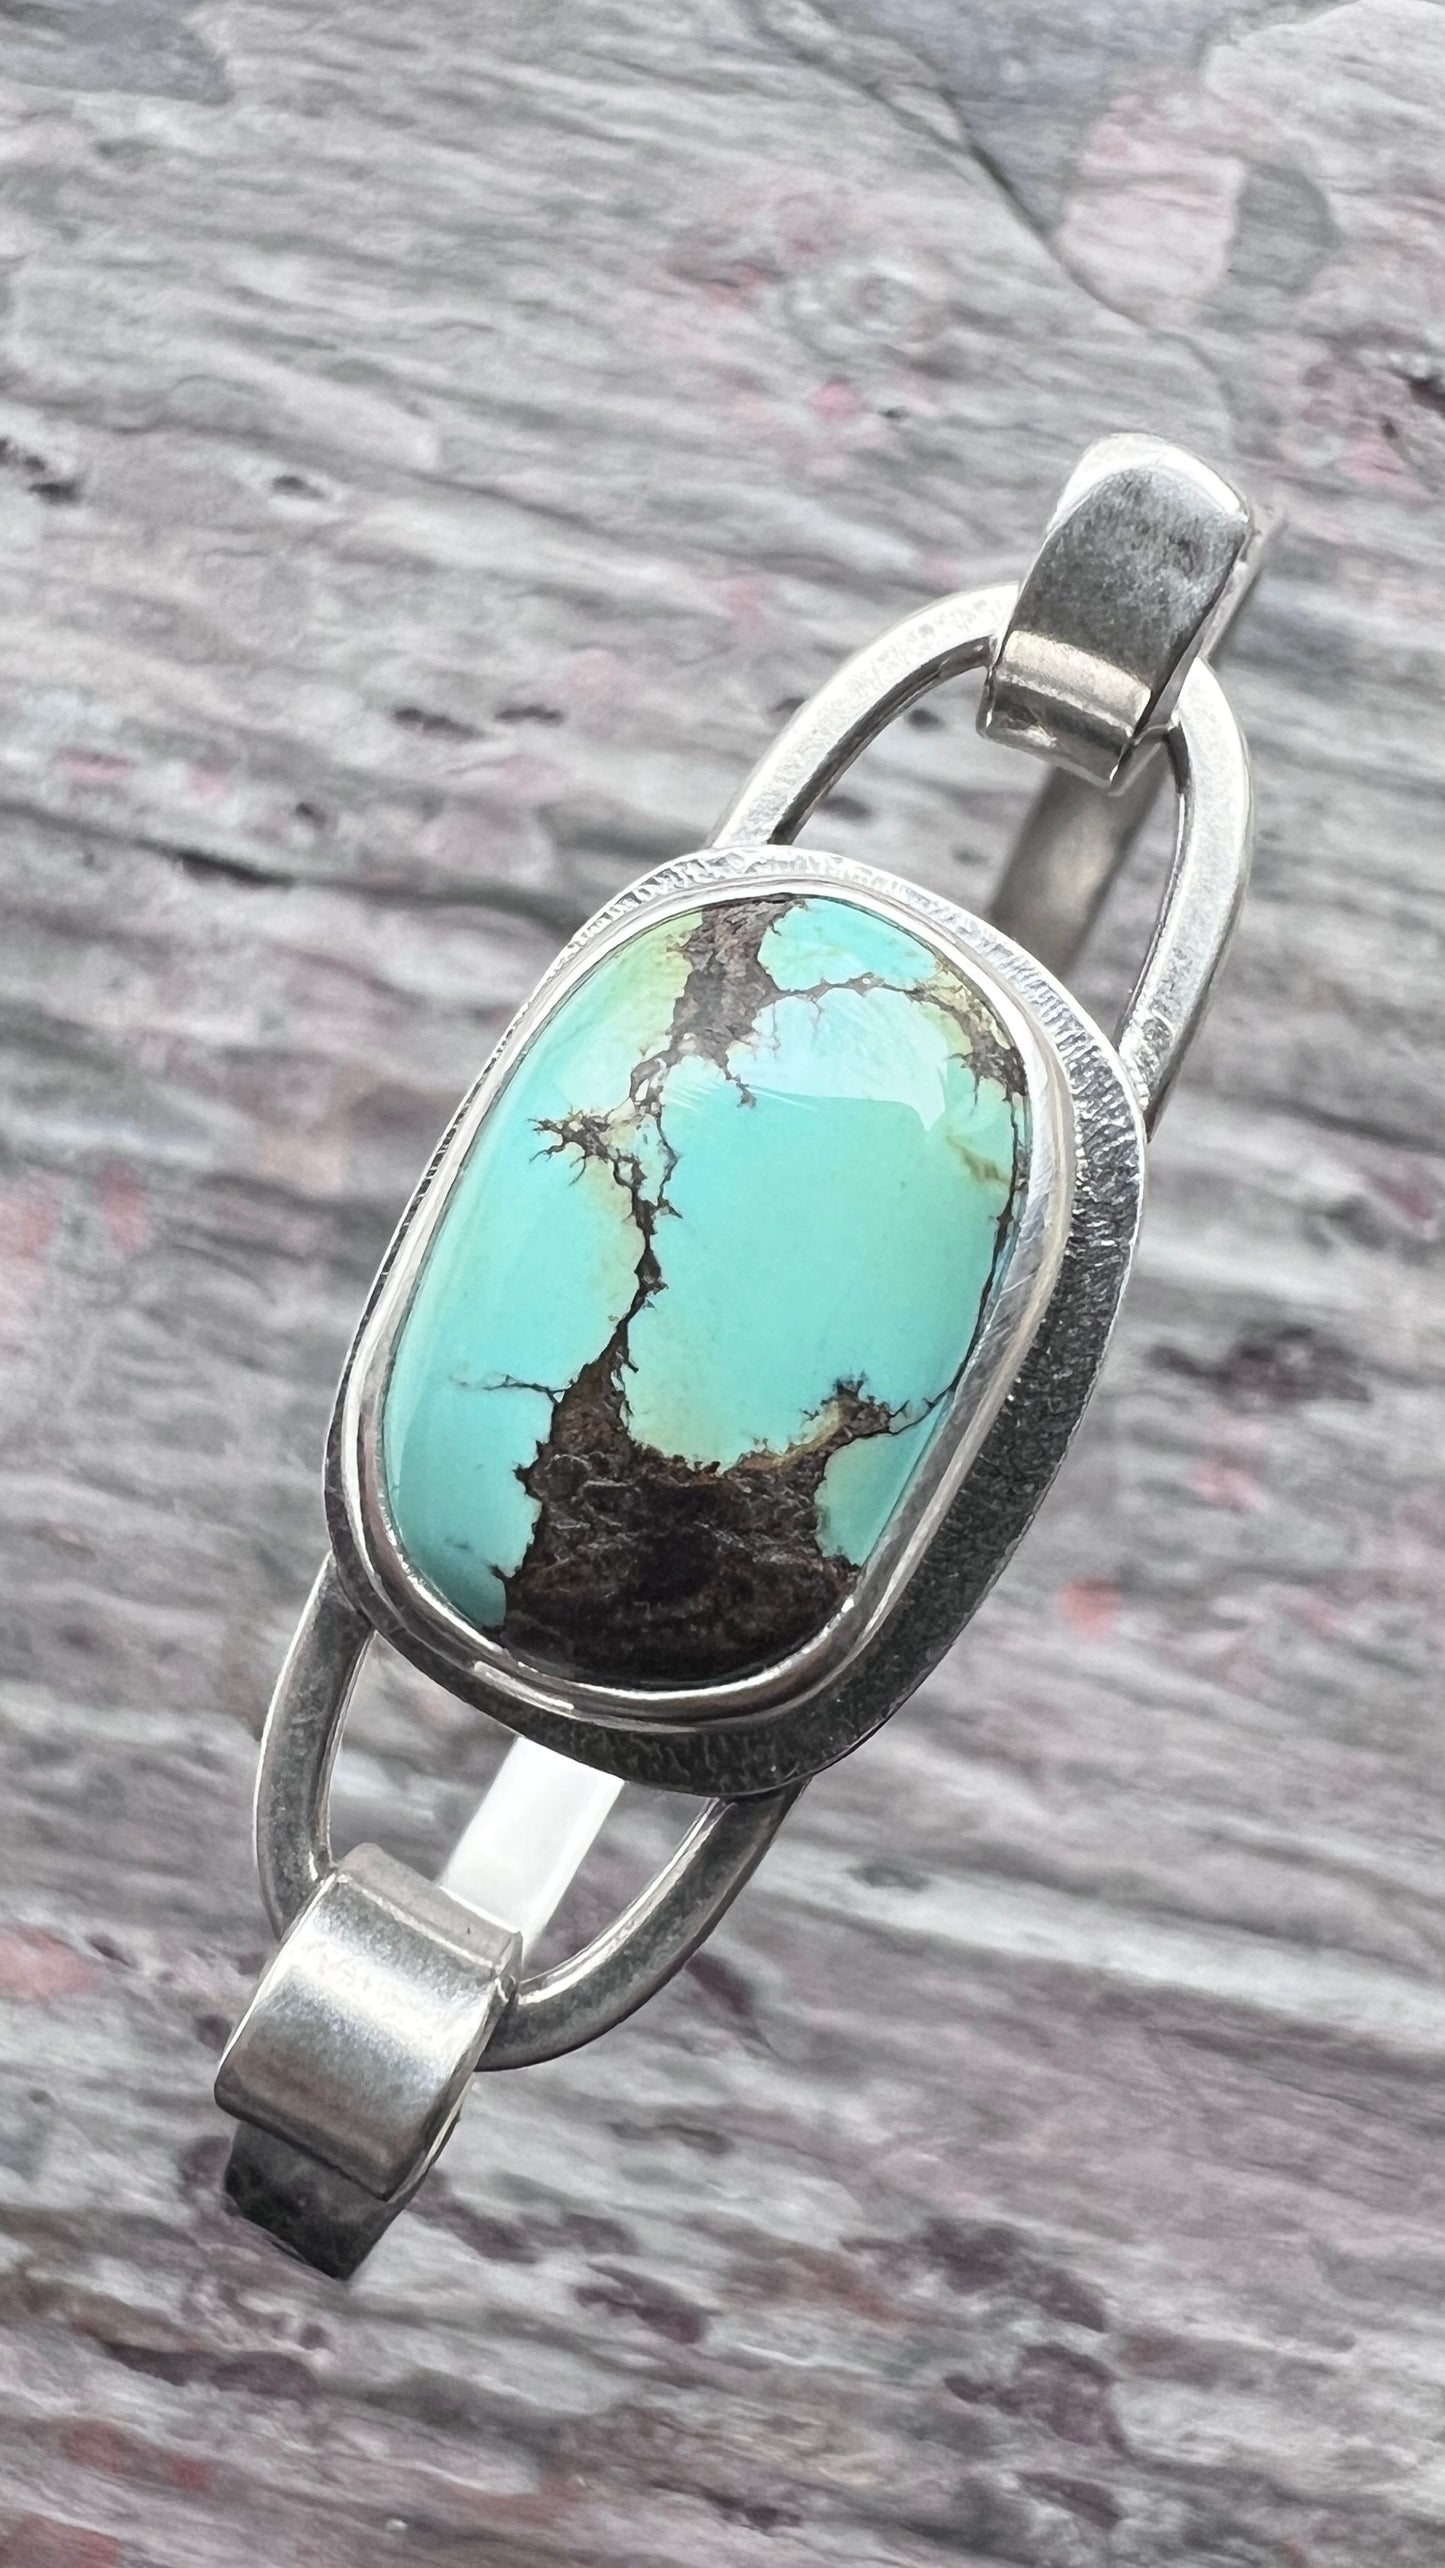 Turquoise Sterling Silver Bracelet | Genuine Natural Turquoise Cuff Bracelet